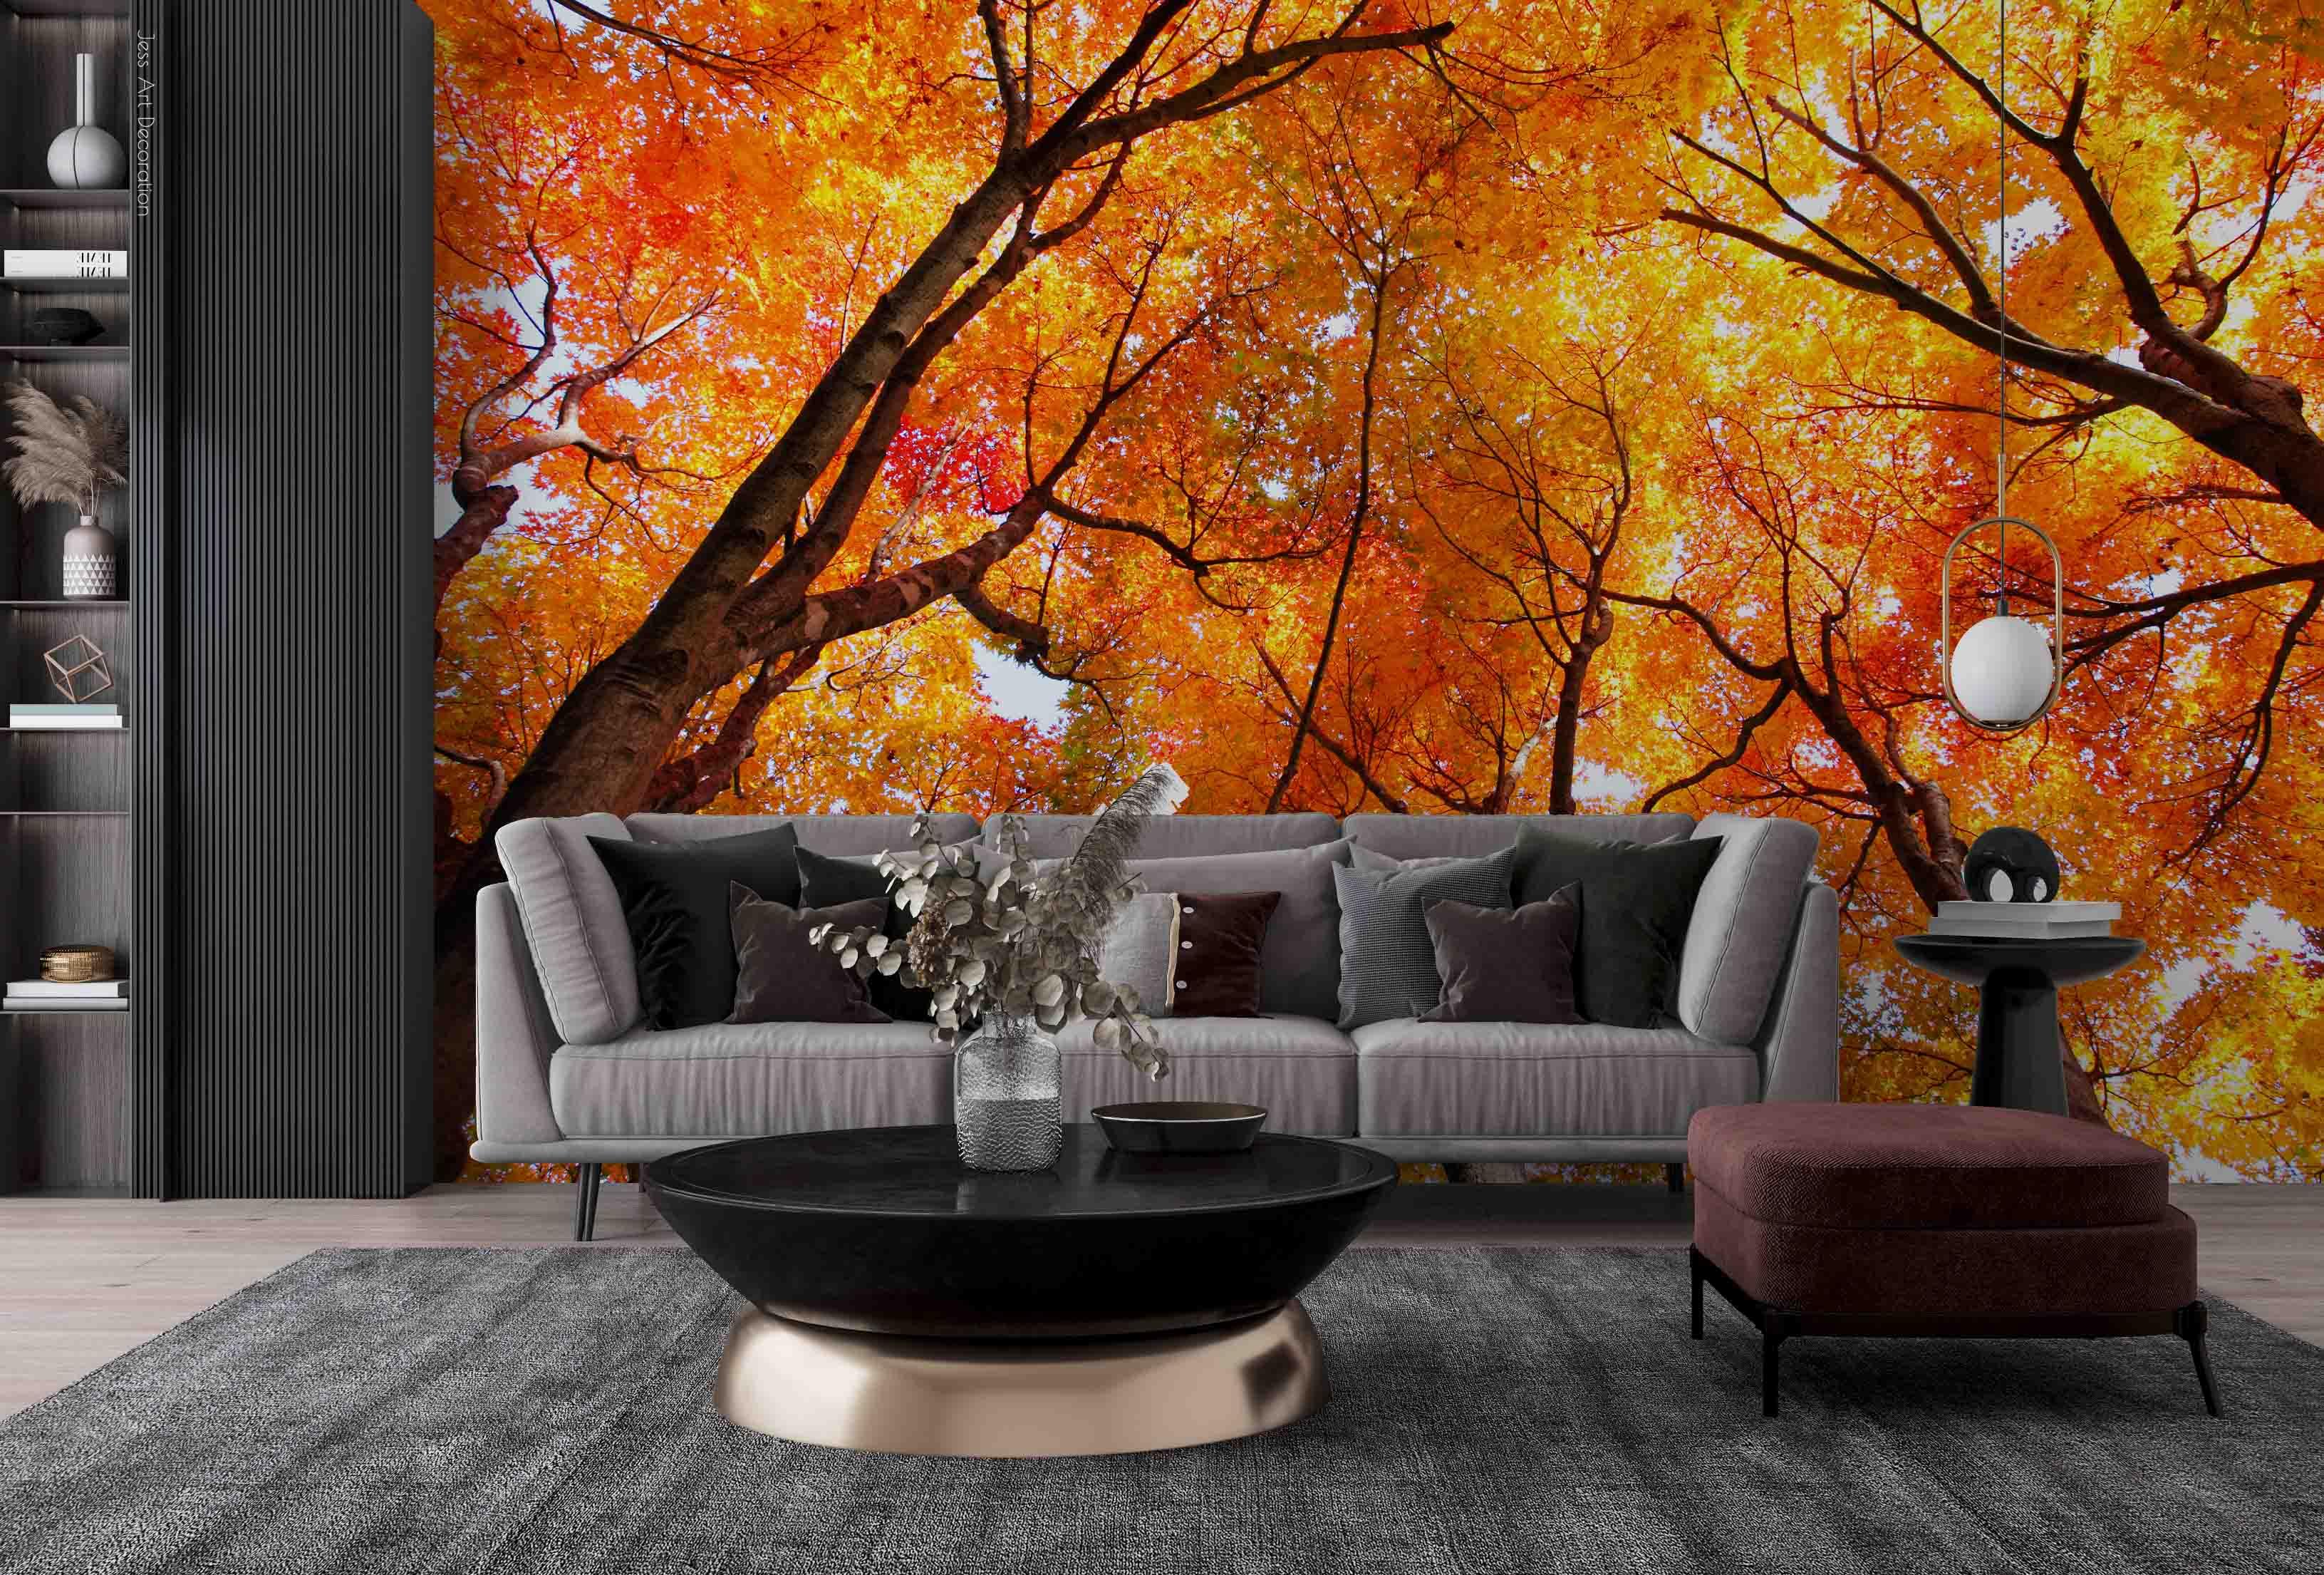 3D Natural Scenery Red Maple Leaf Tree Wall Mural Wallpaper GD 2271- Jess Art Decoration